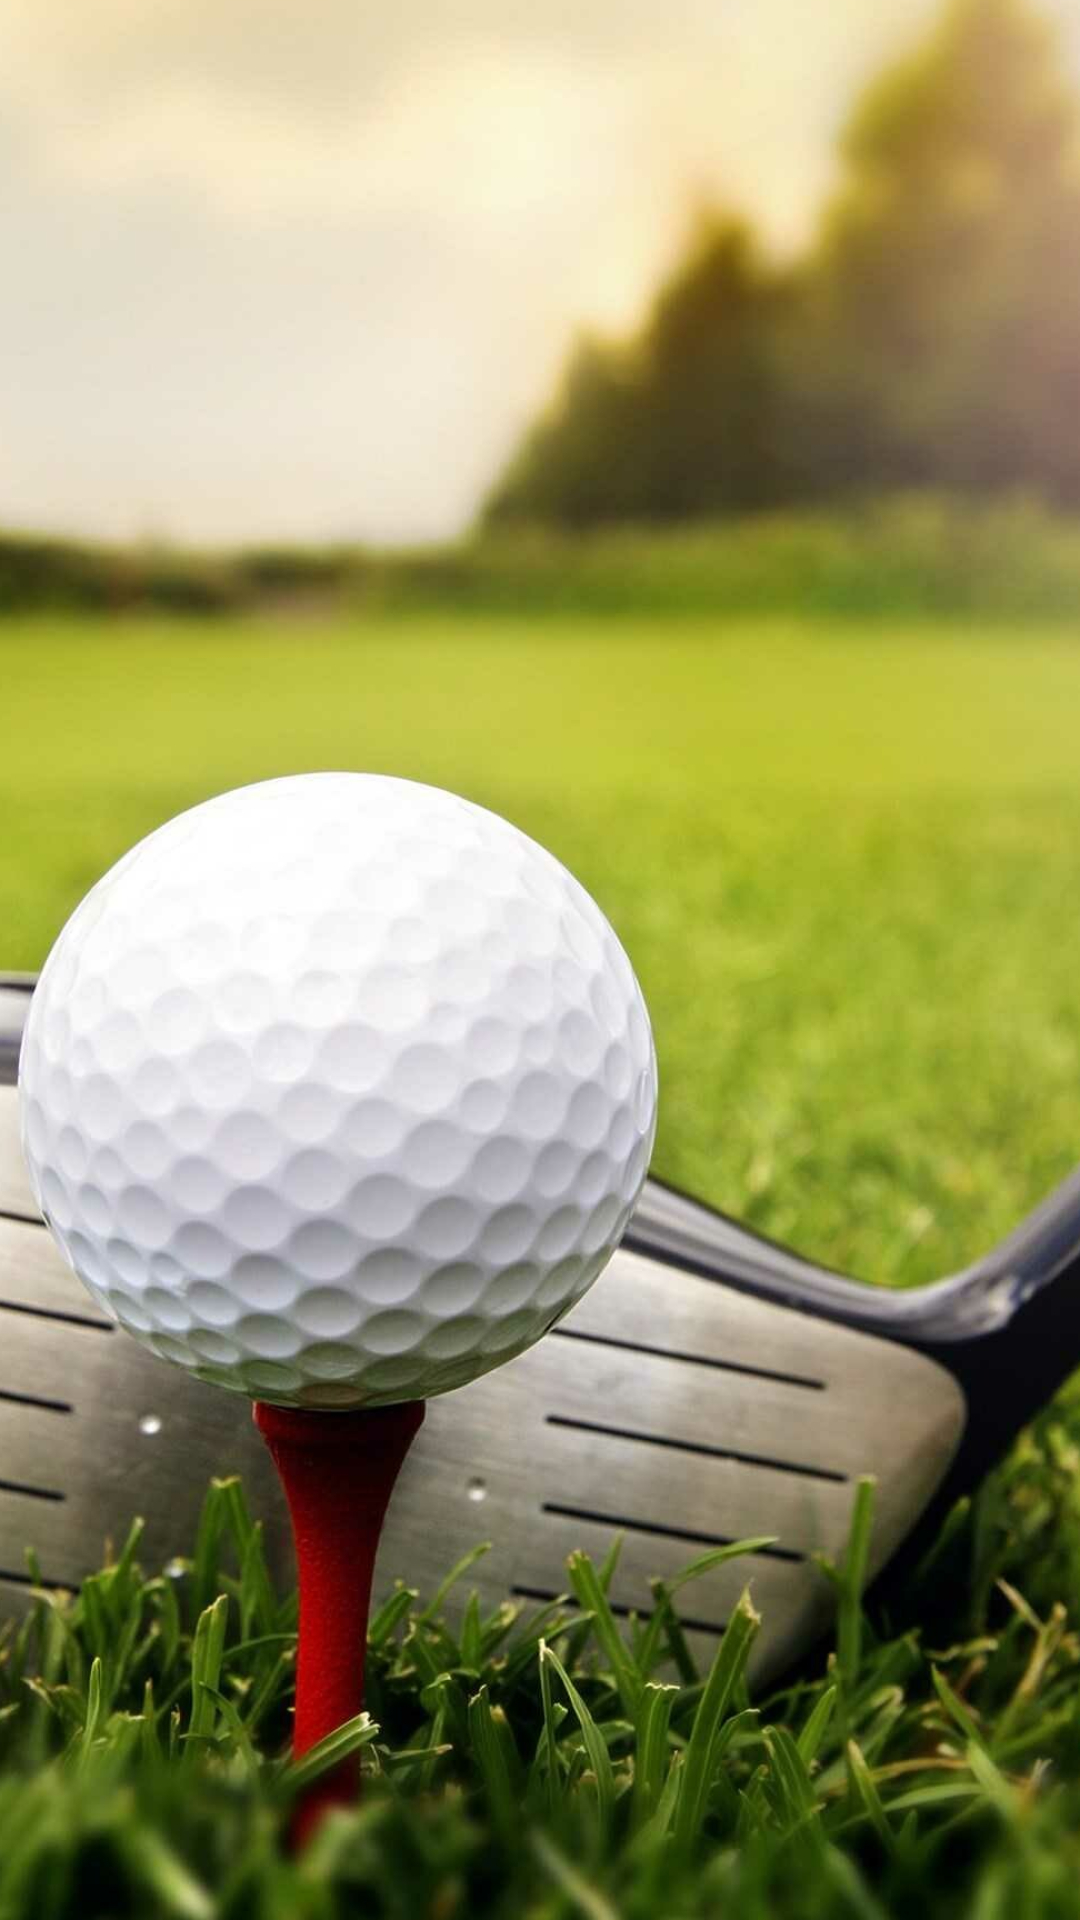 Golf: A club and ball sport, Players hit a small ball into a series of holes on a course. 1080x1920 Full HD Background.